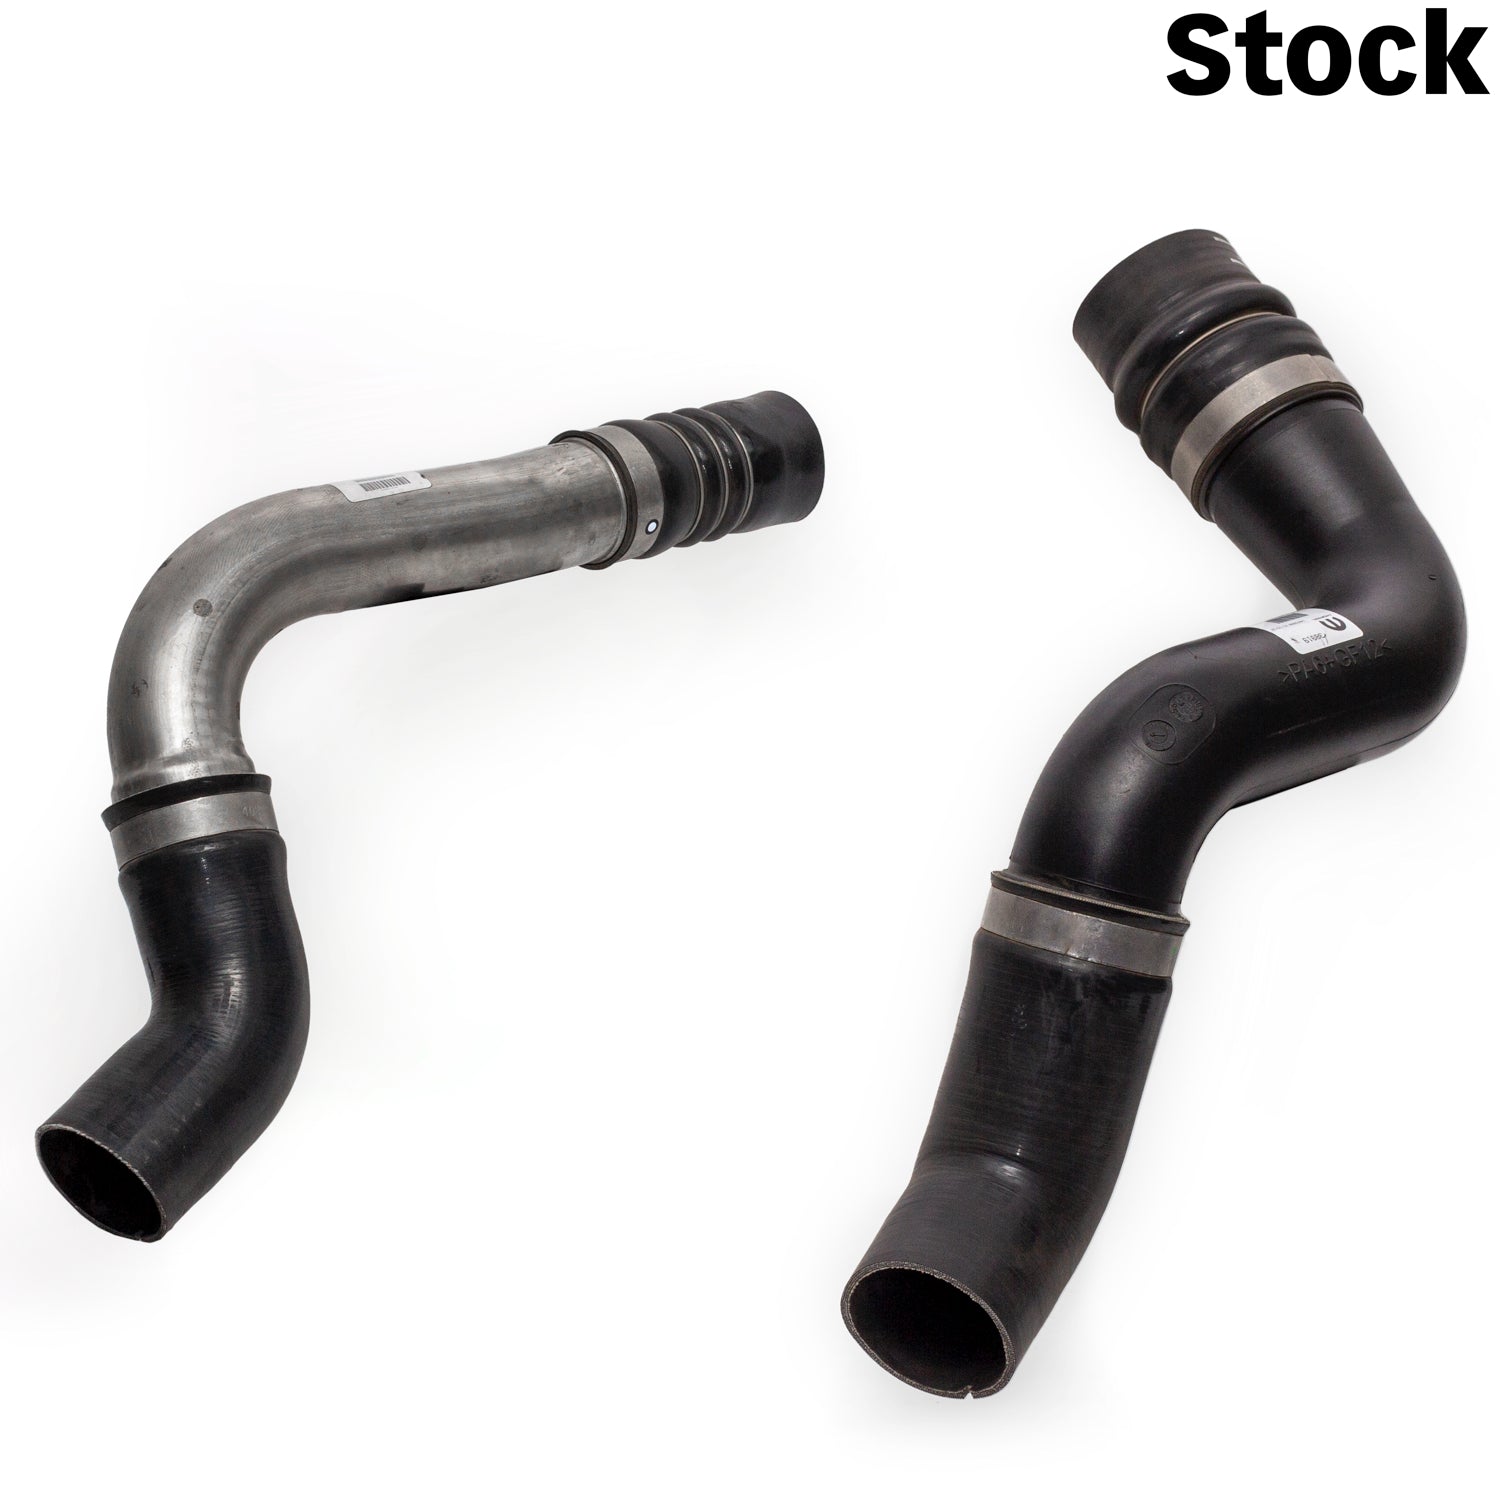 Assembled Set of Stock Boost Tubes for 2019+ Ram 2500/3500 6.7L